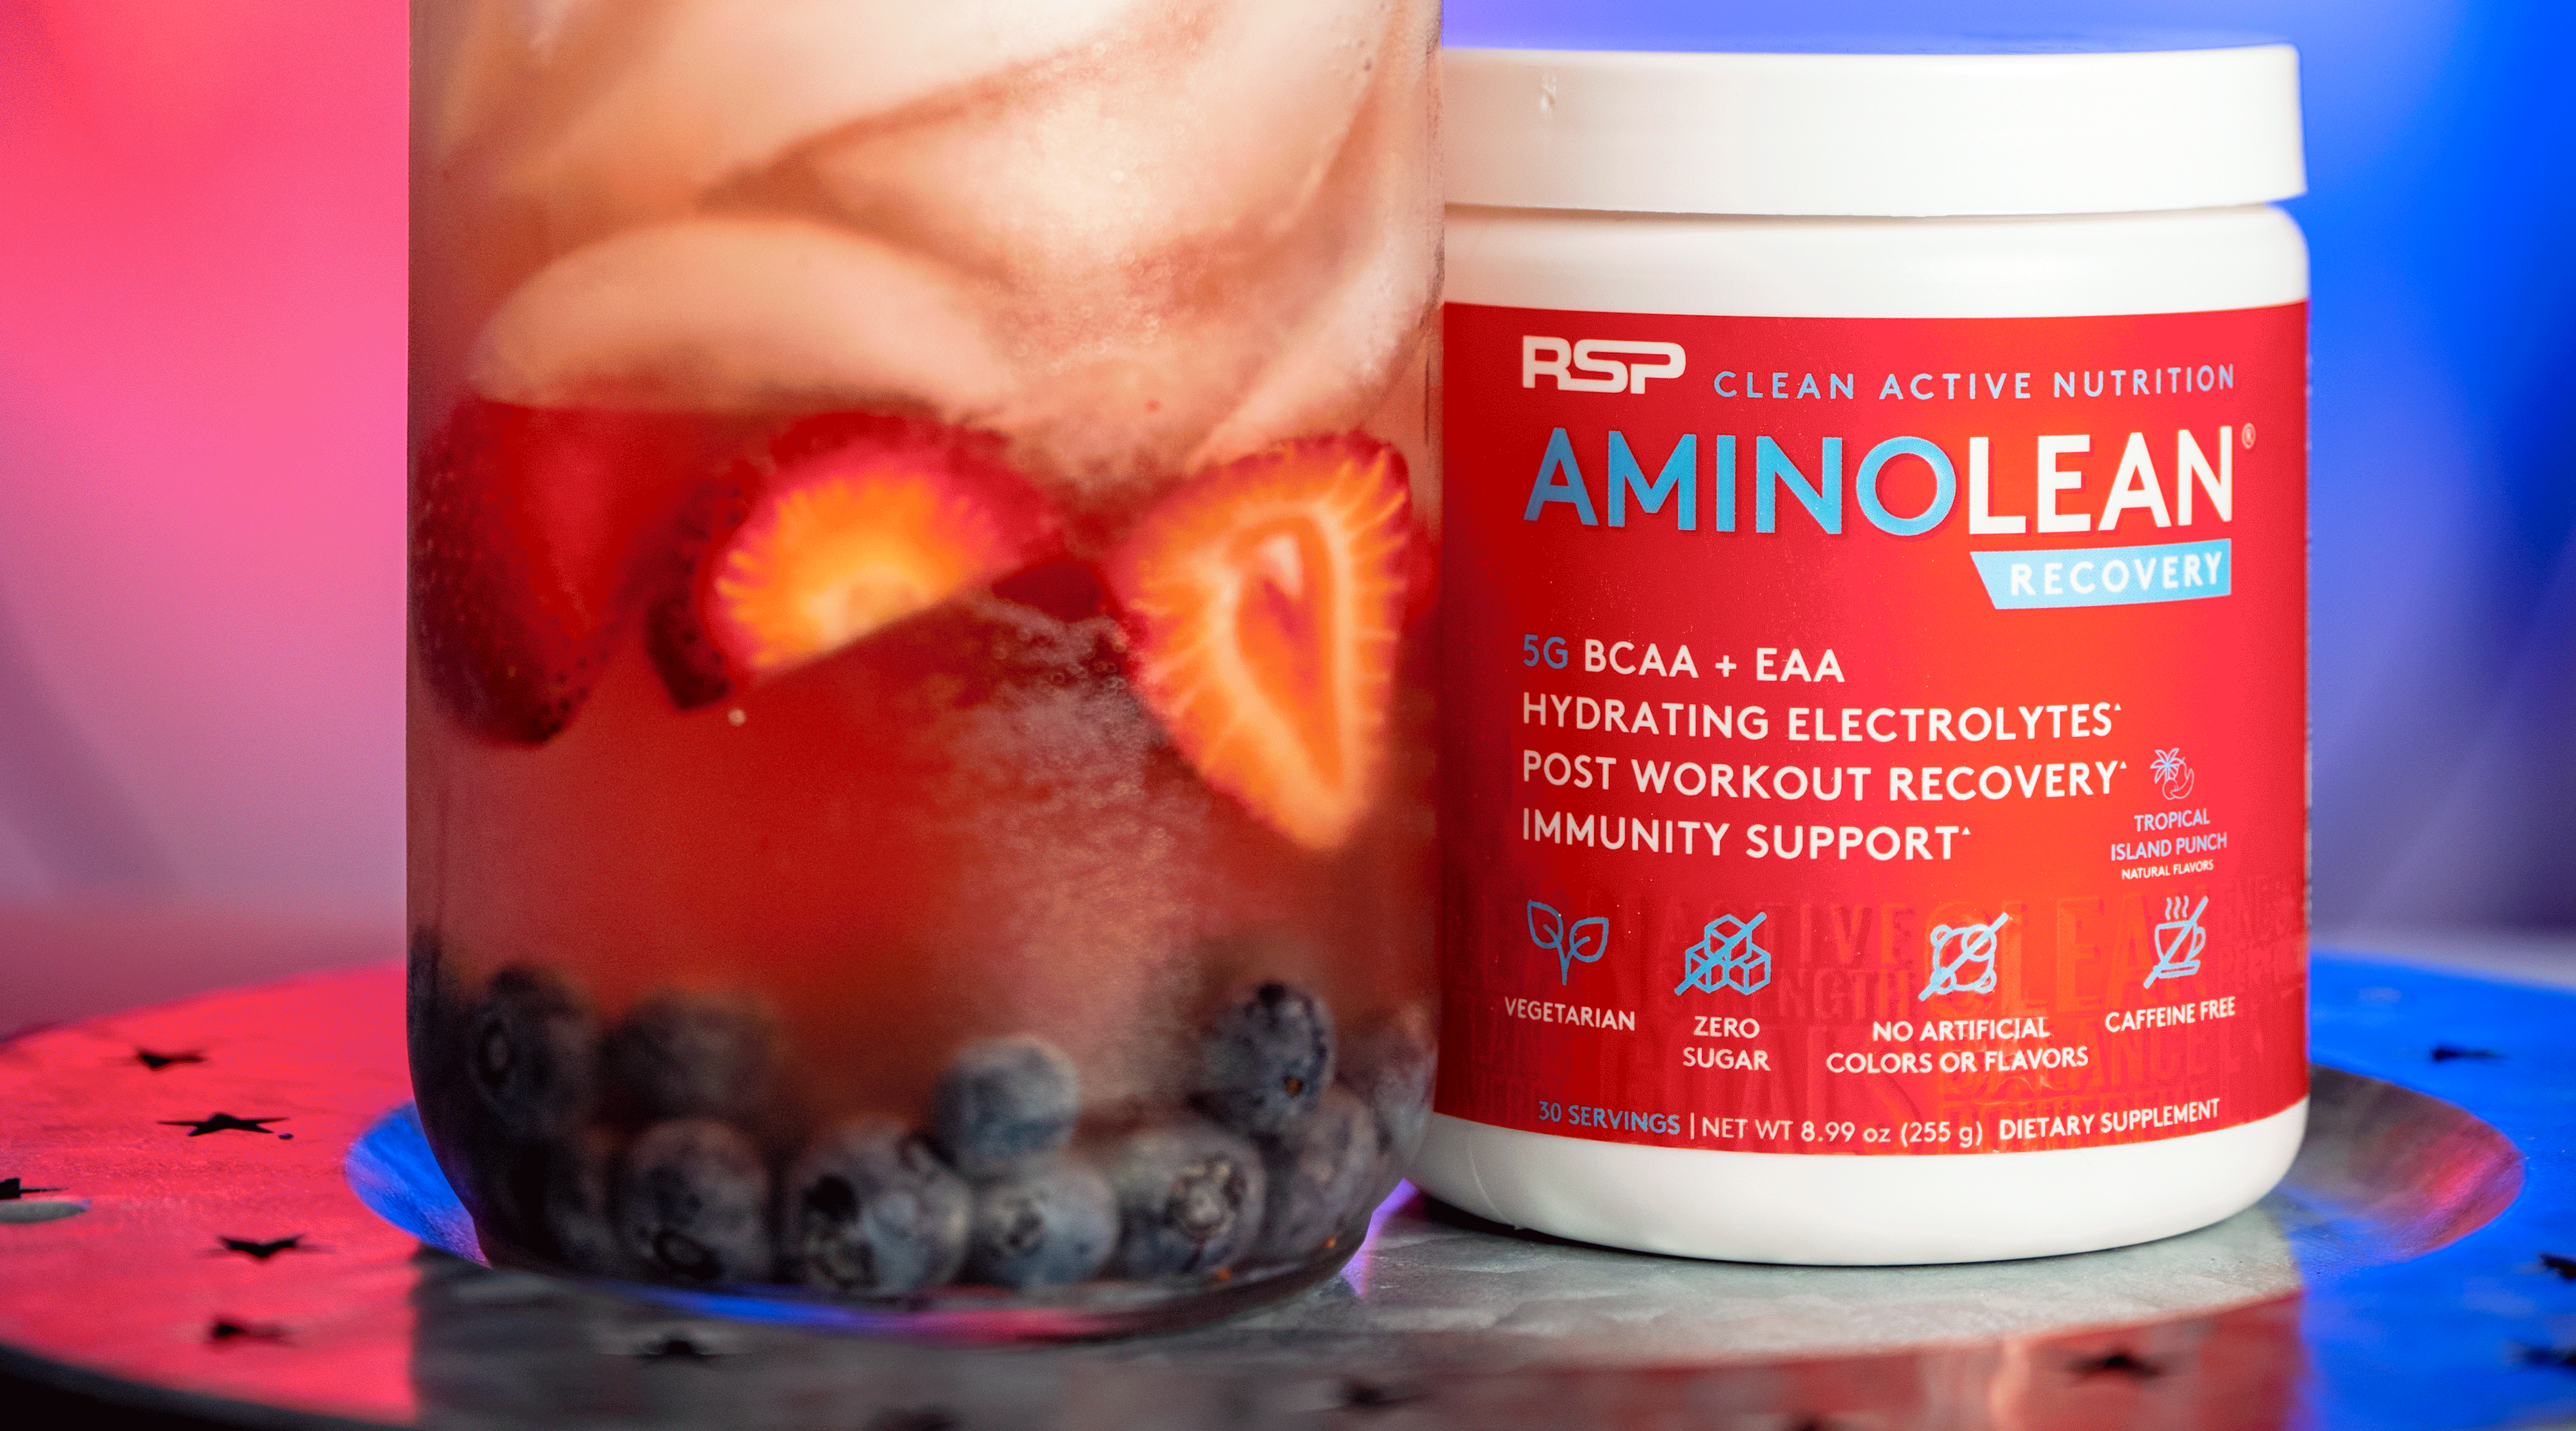 Amino lean Recovery tropical island punch with a berry recovery refresher drink